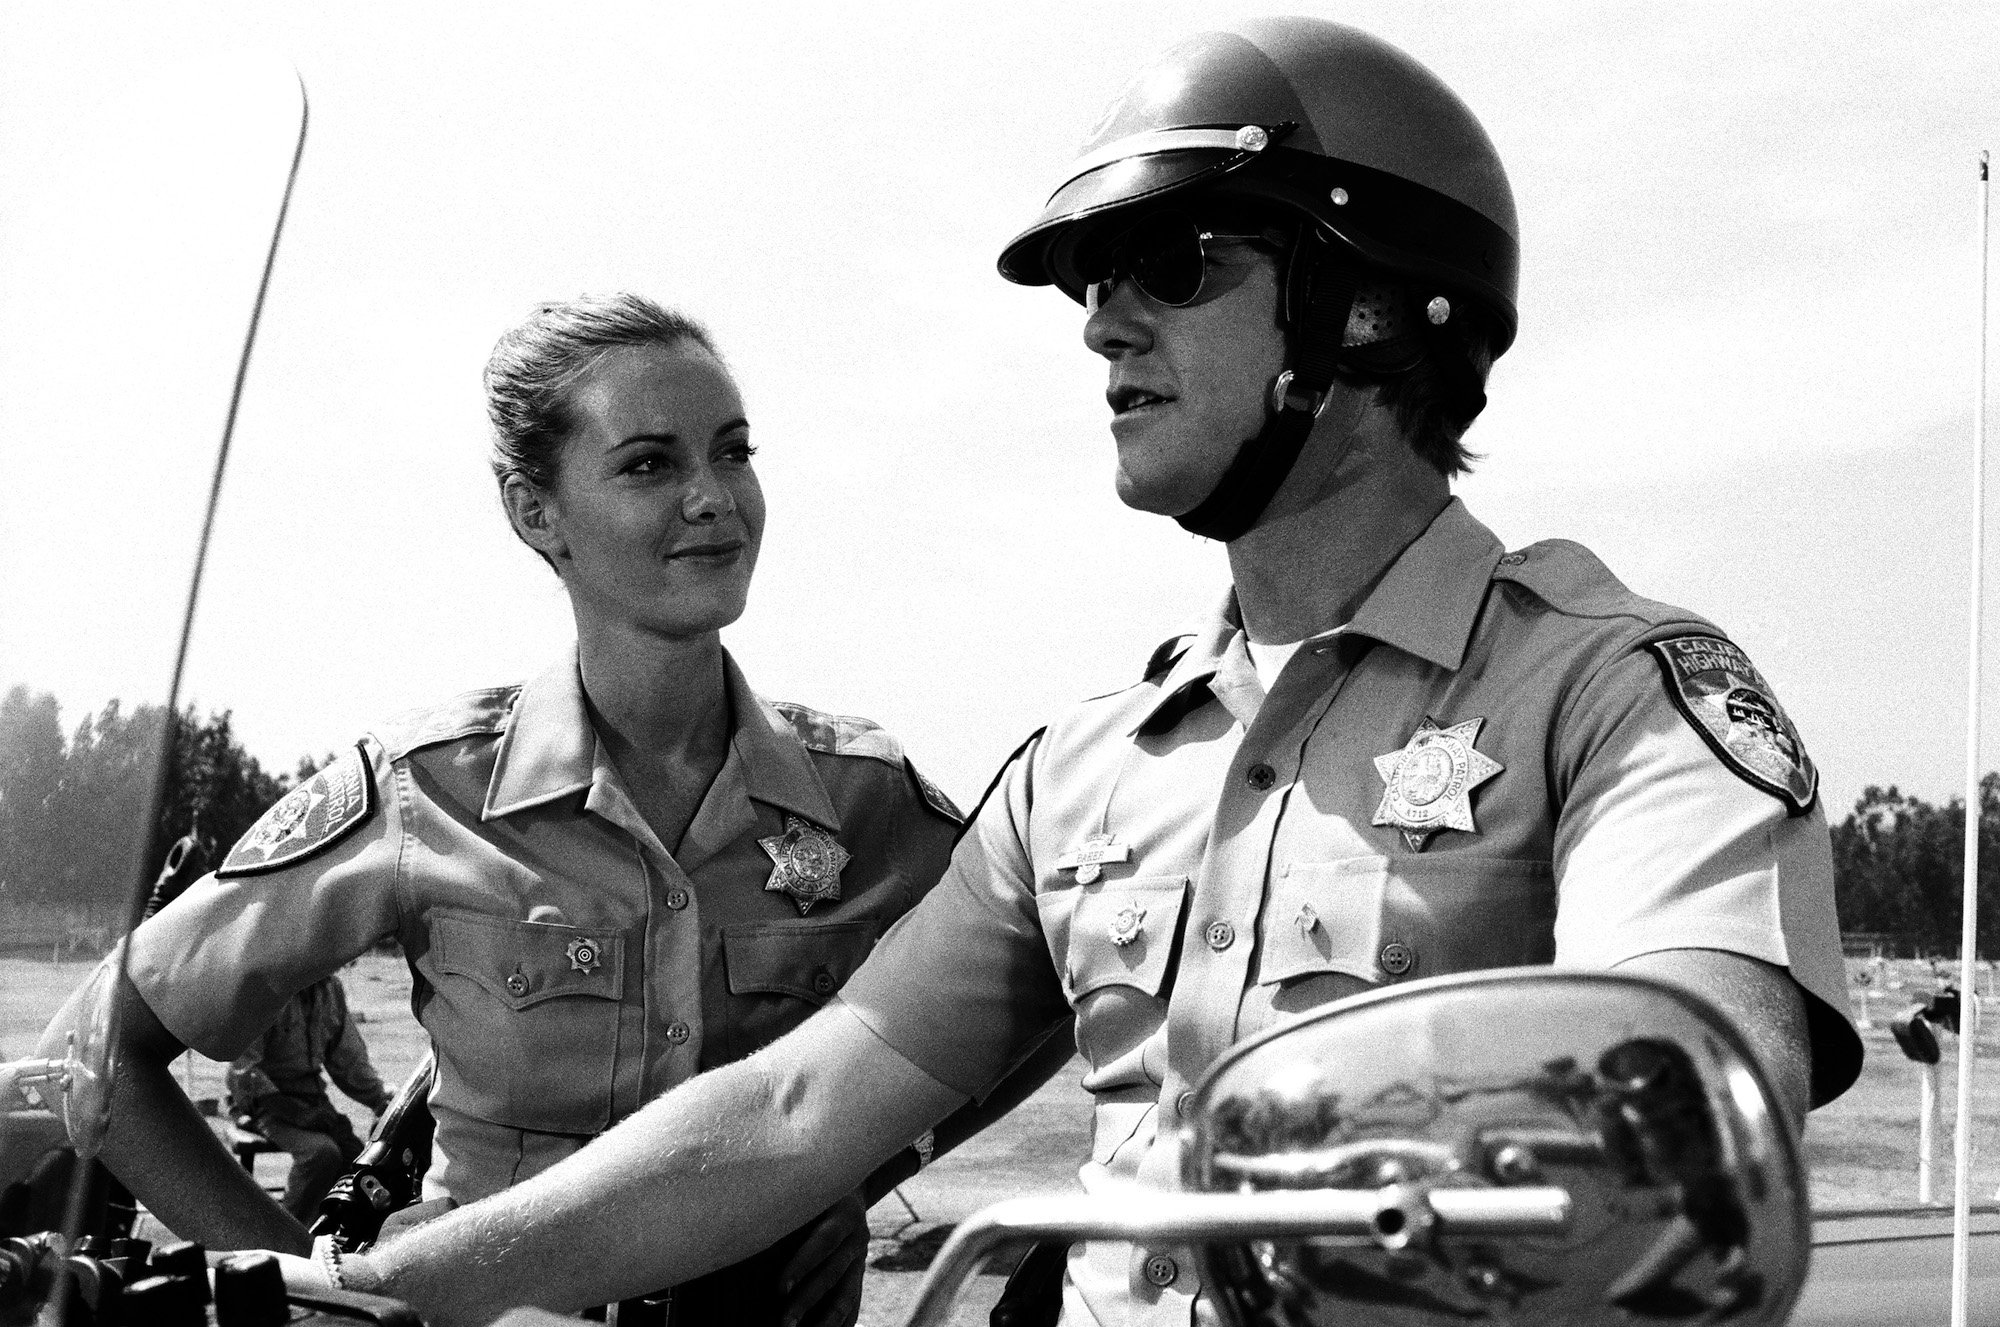 A black-and-white photo of actors Anne Lockhart as Officer Kathy Mulligan and Larry Wilcox as Officer Jon Baker in 'CHiPs,' Episode 7, "Return of the Supercycle," aired on October 27, 1979